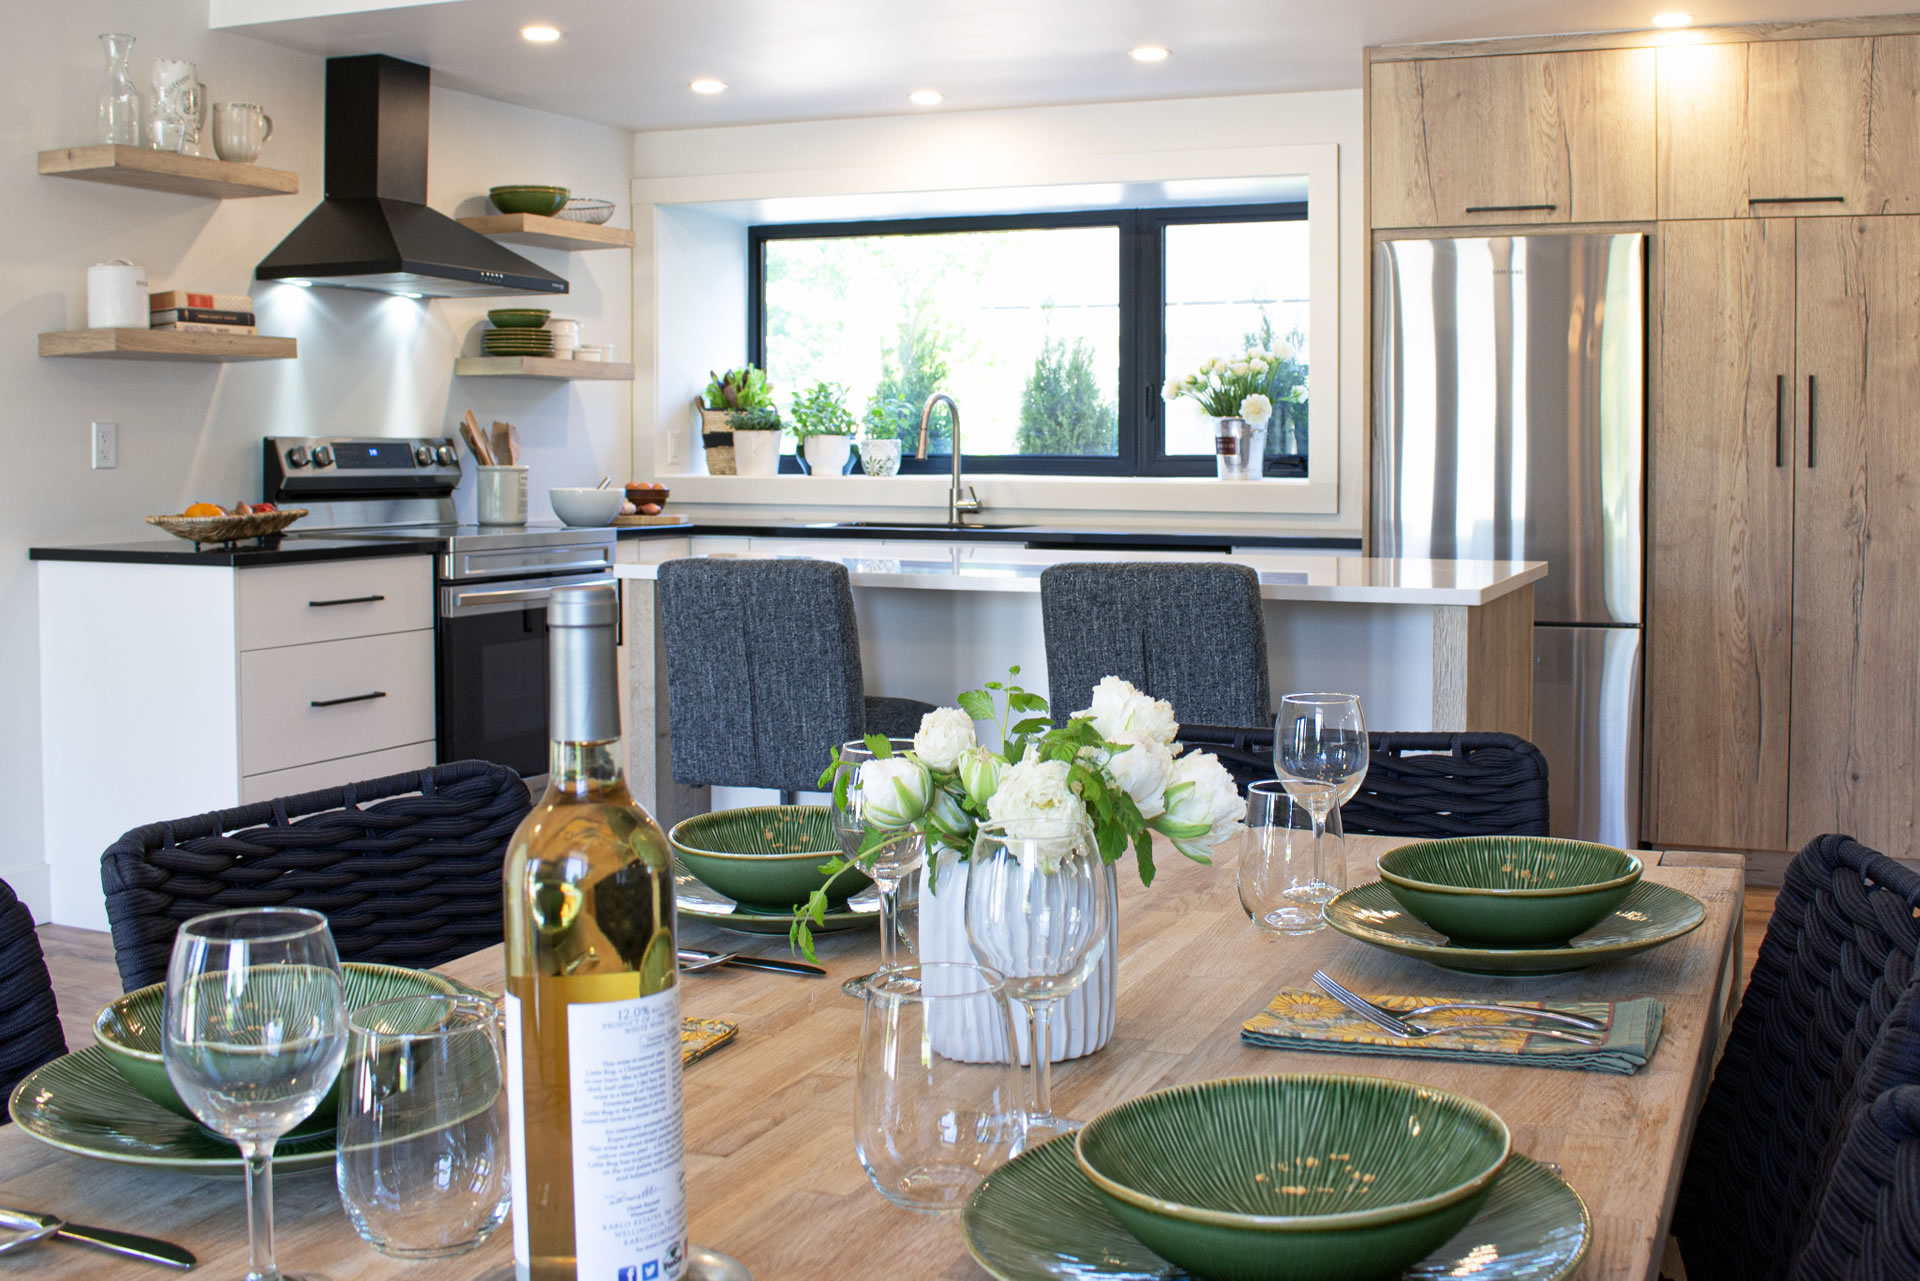 Chardonnay Dining and Kitchen Areas